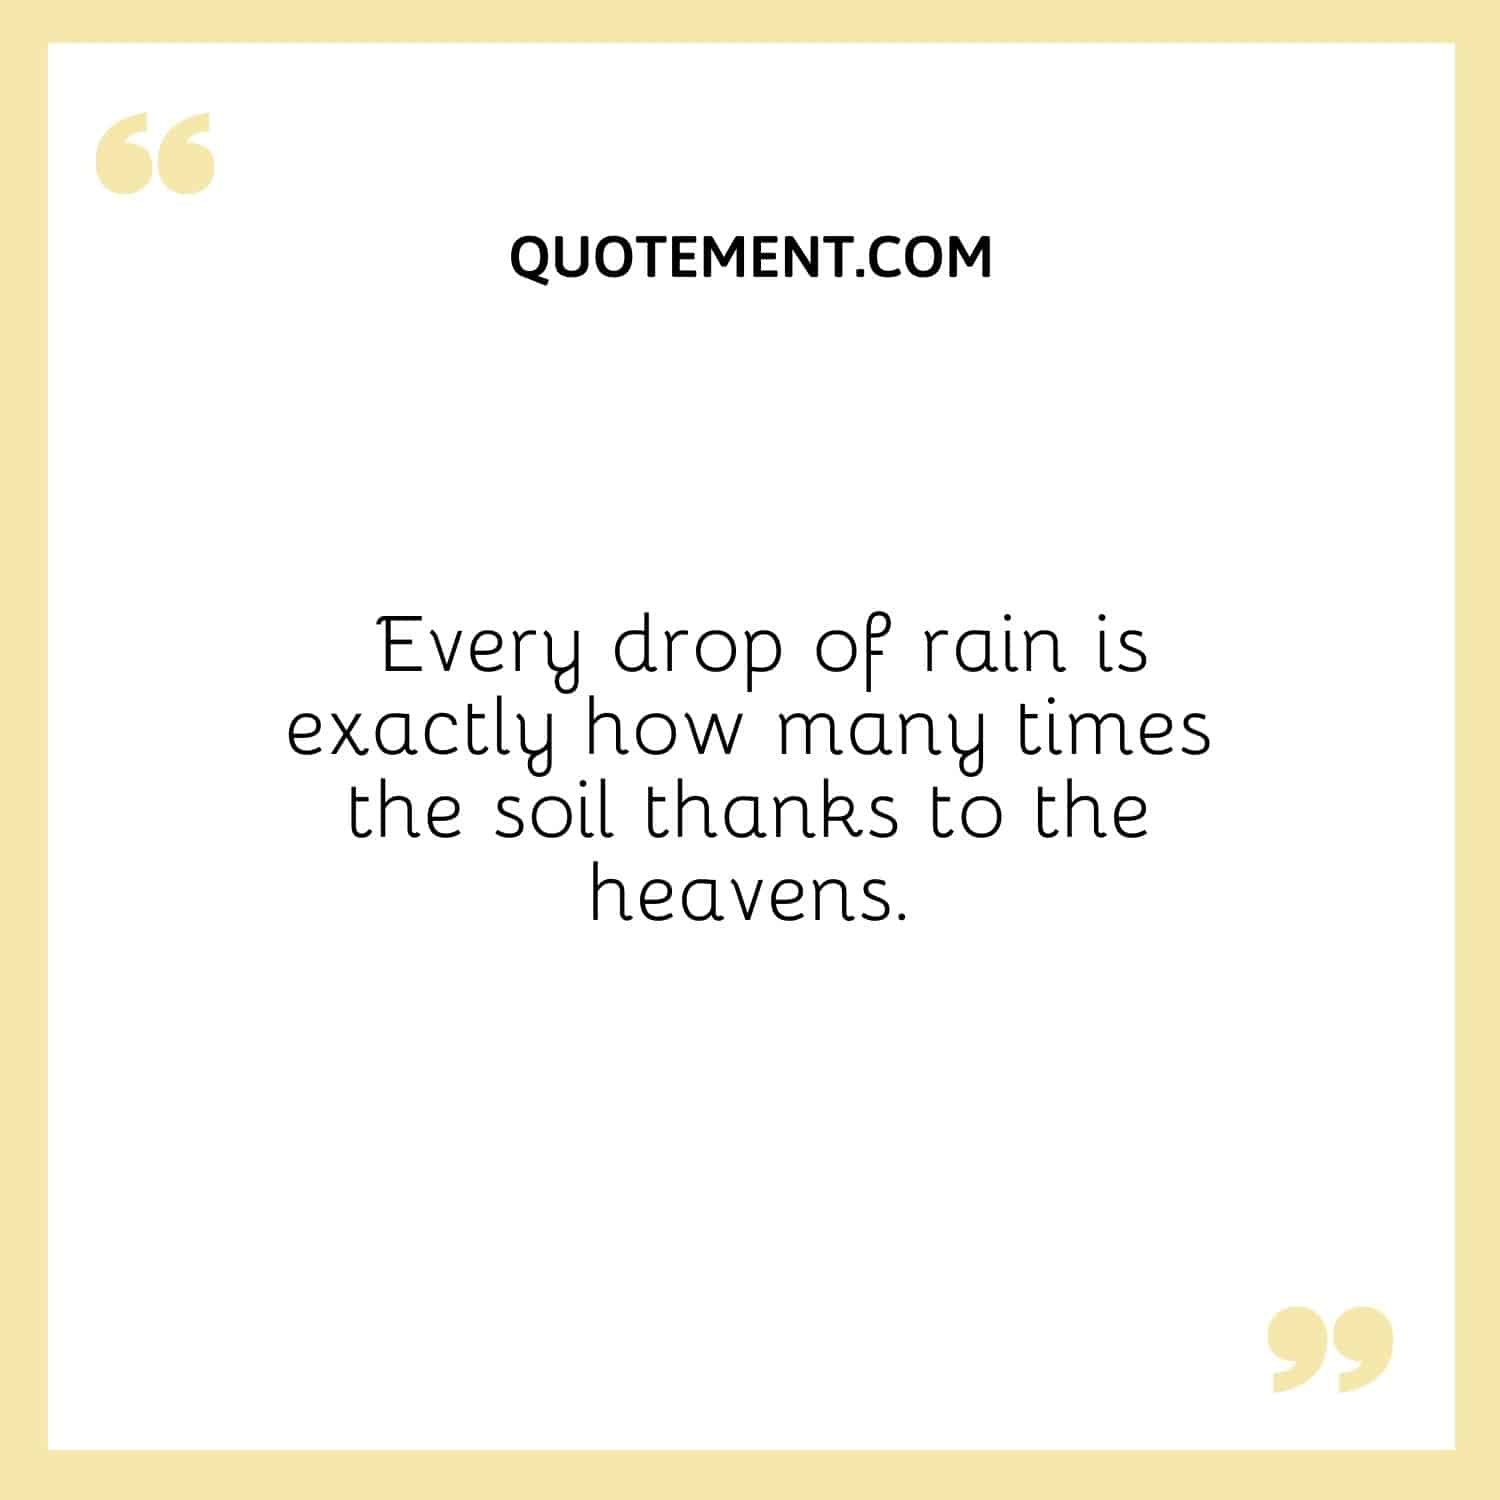 Every drop of rain is exactly how many times the soil thanks to the heavens.